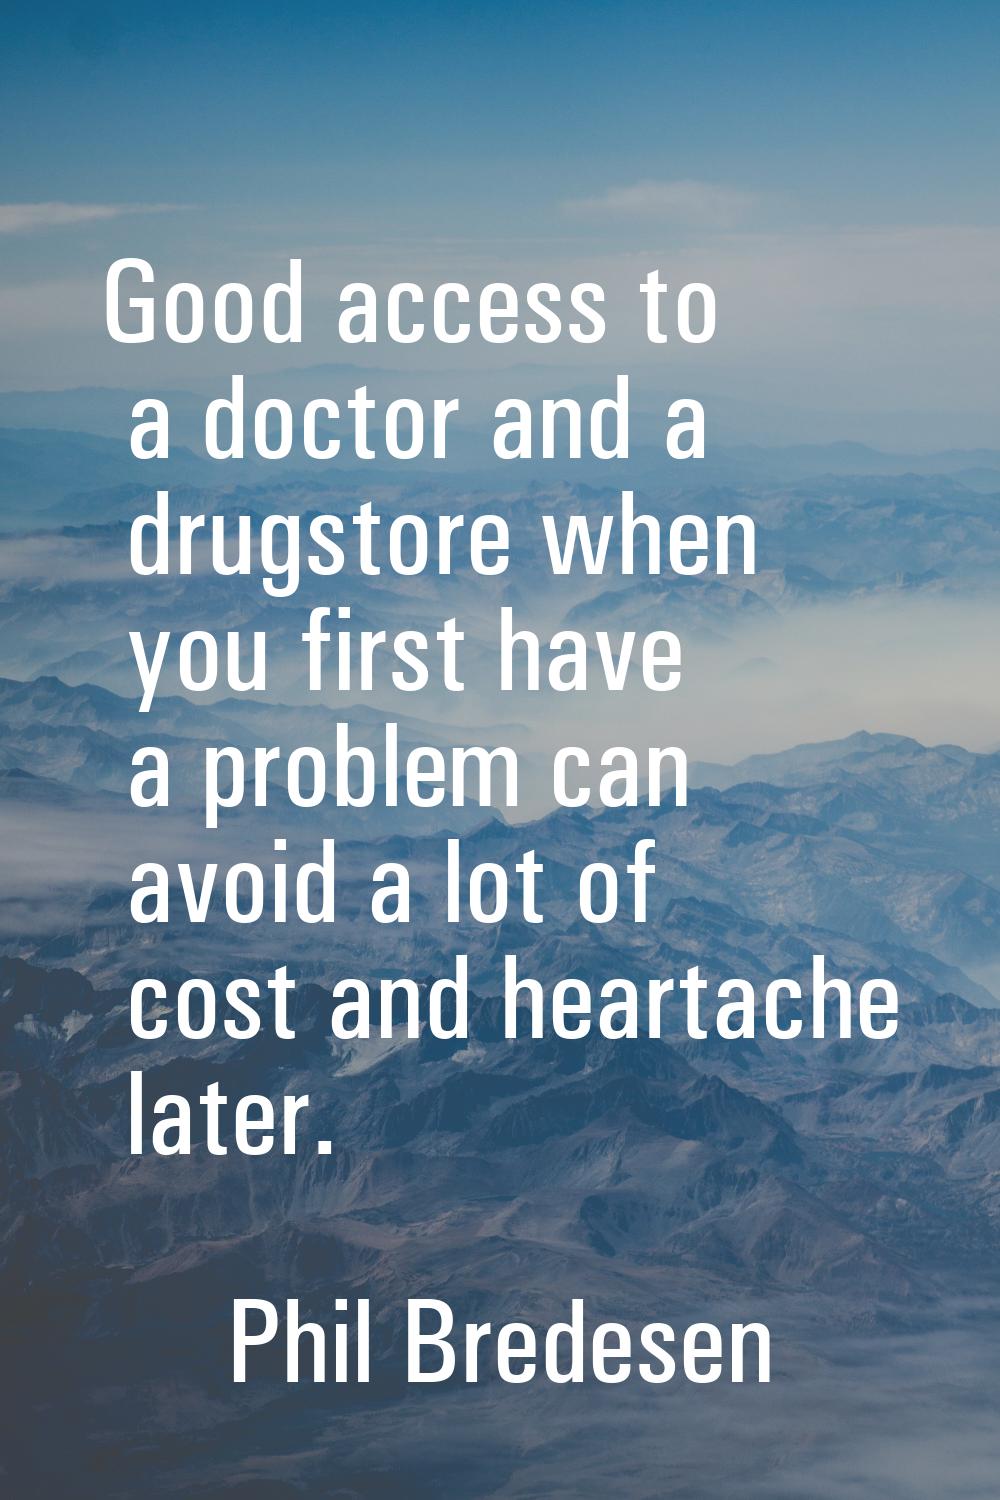 Good access to a doctor and a drugstore when you first have a problem can avoid a lot of cost and h